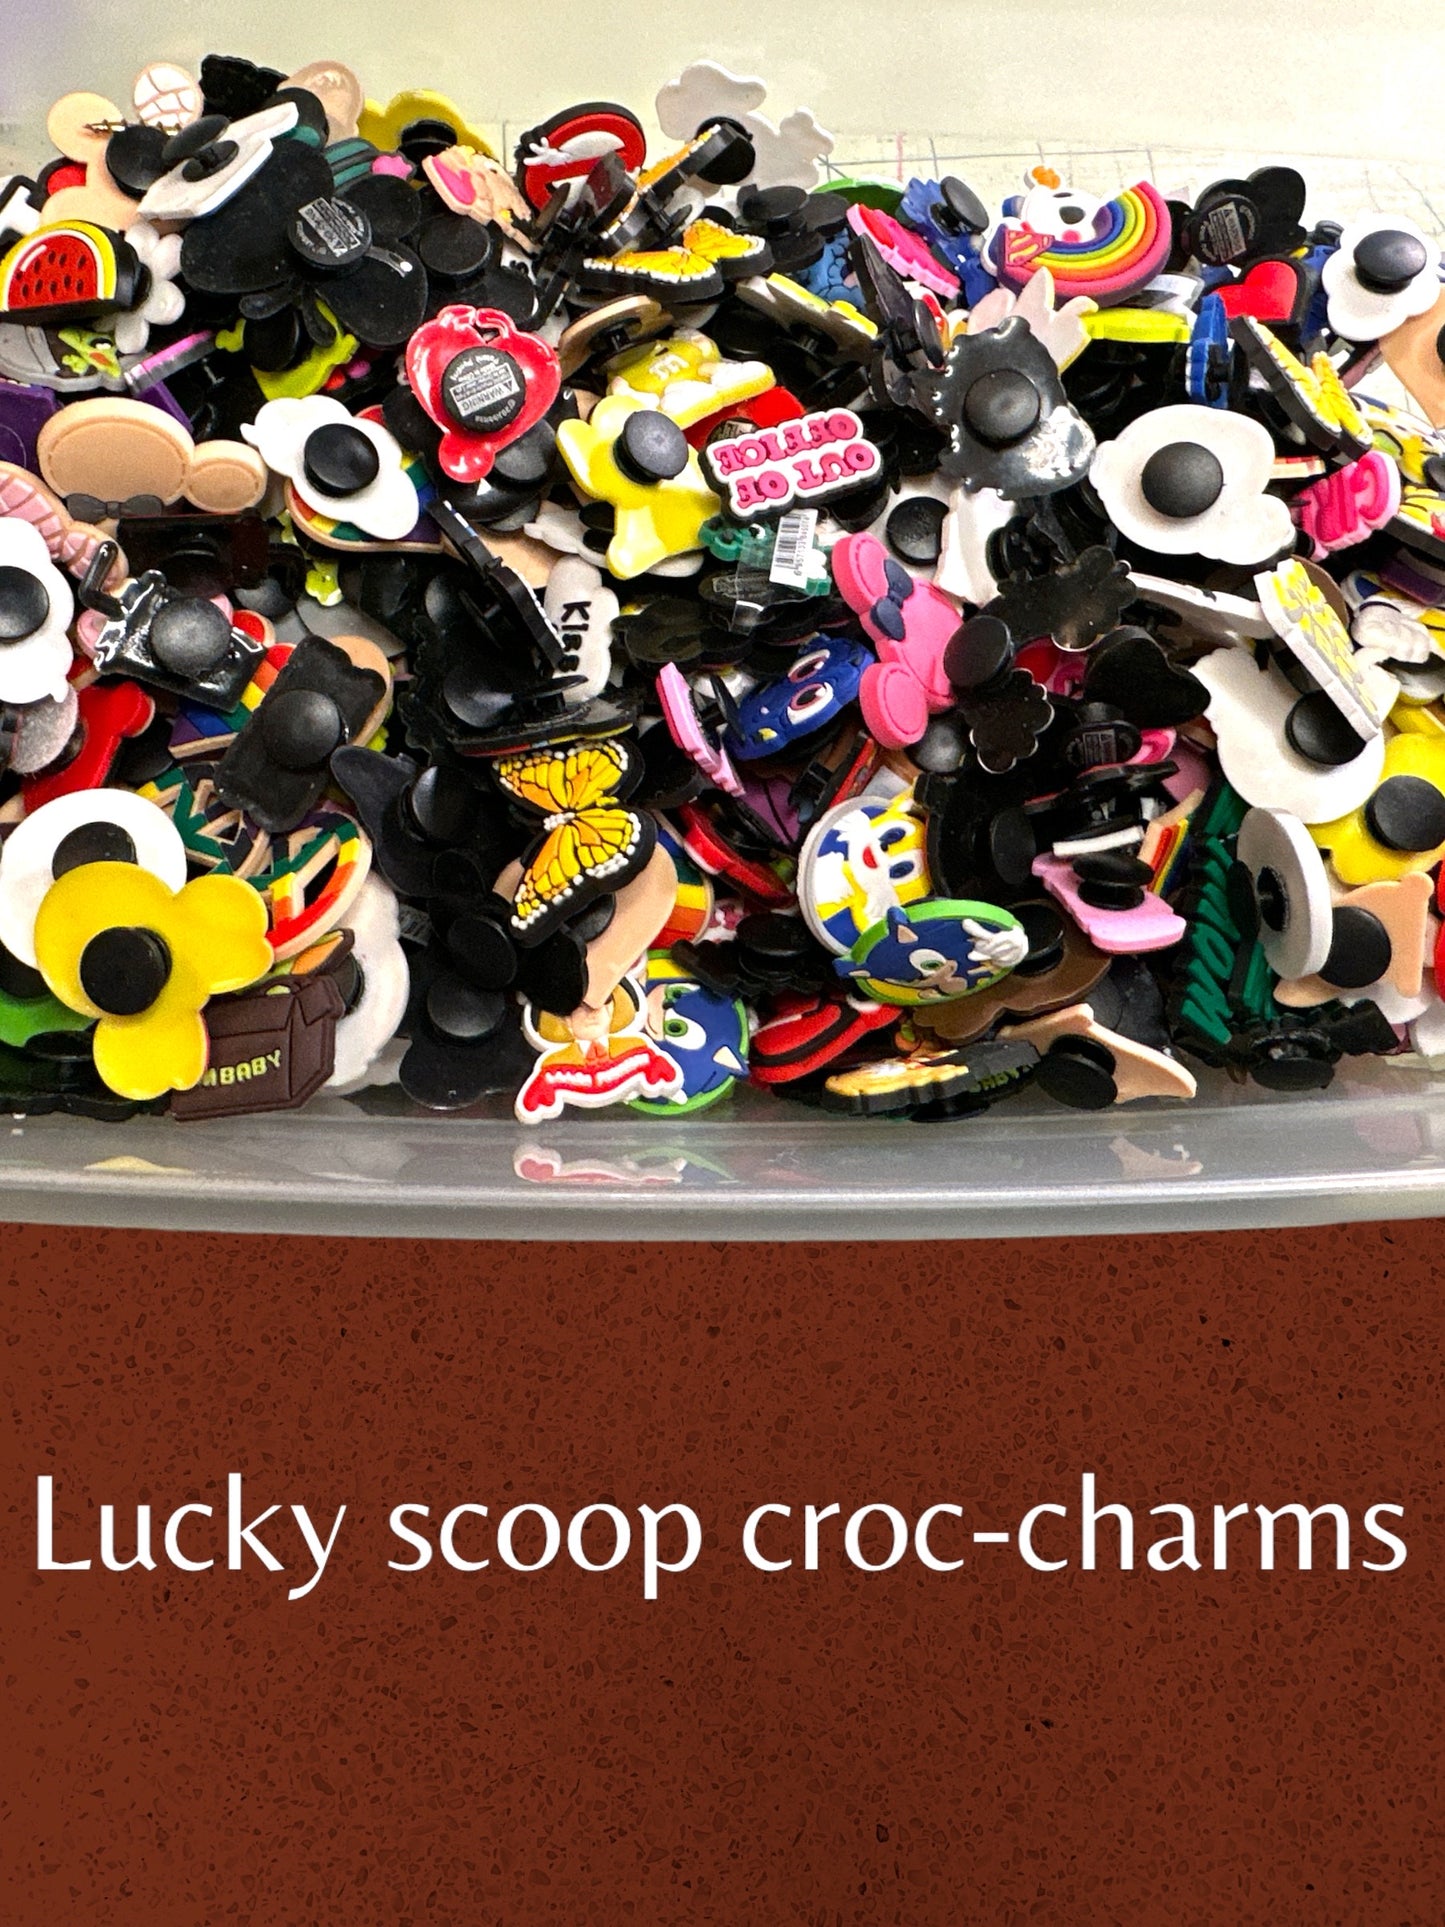 Croc-Charms Lucky scoop